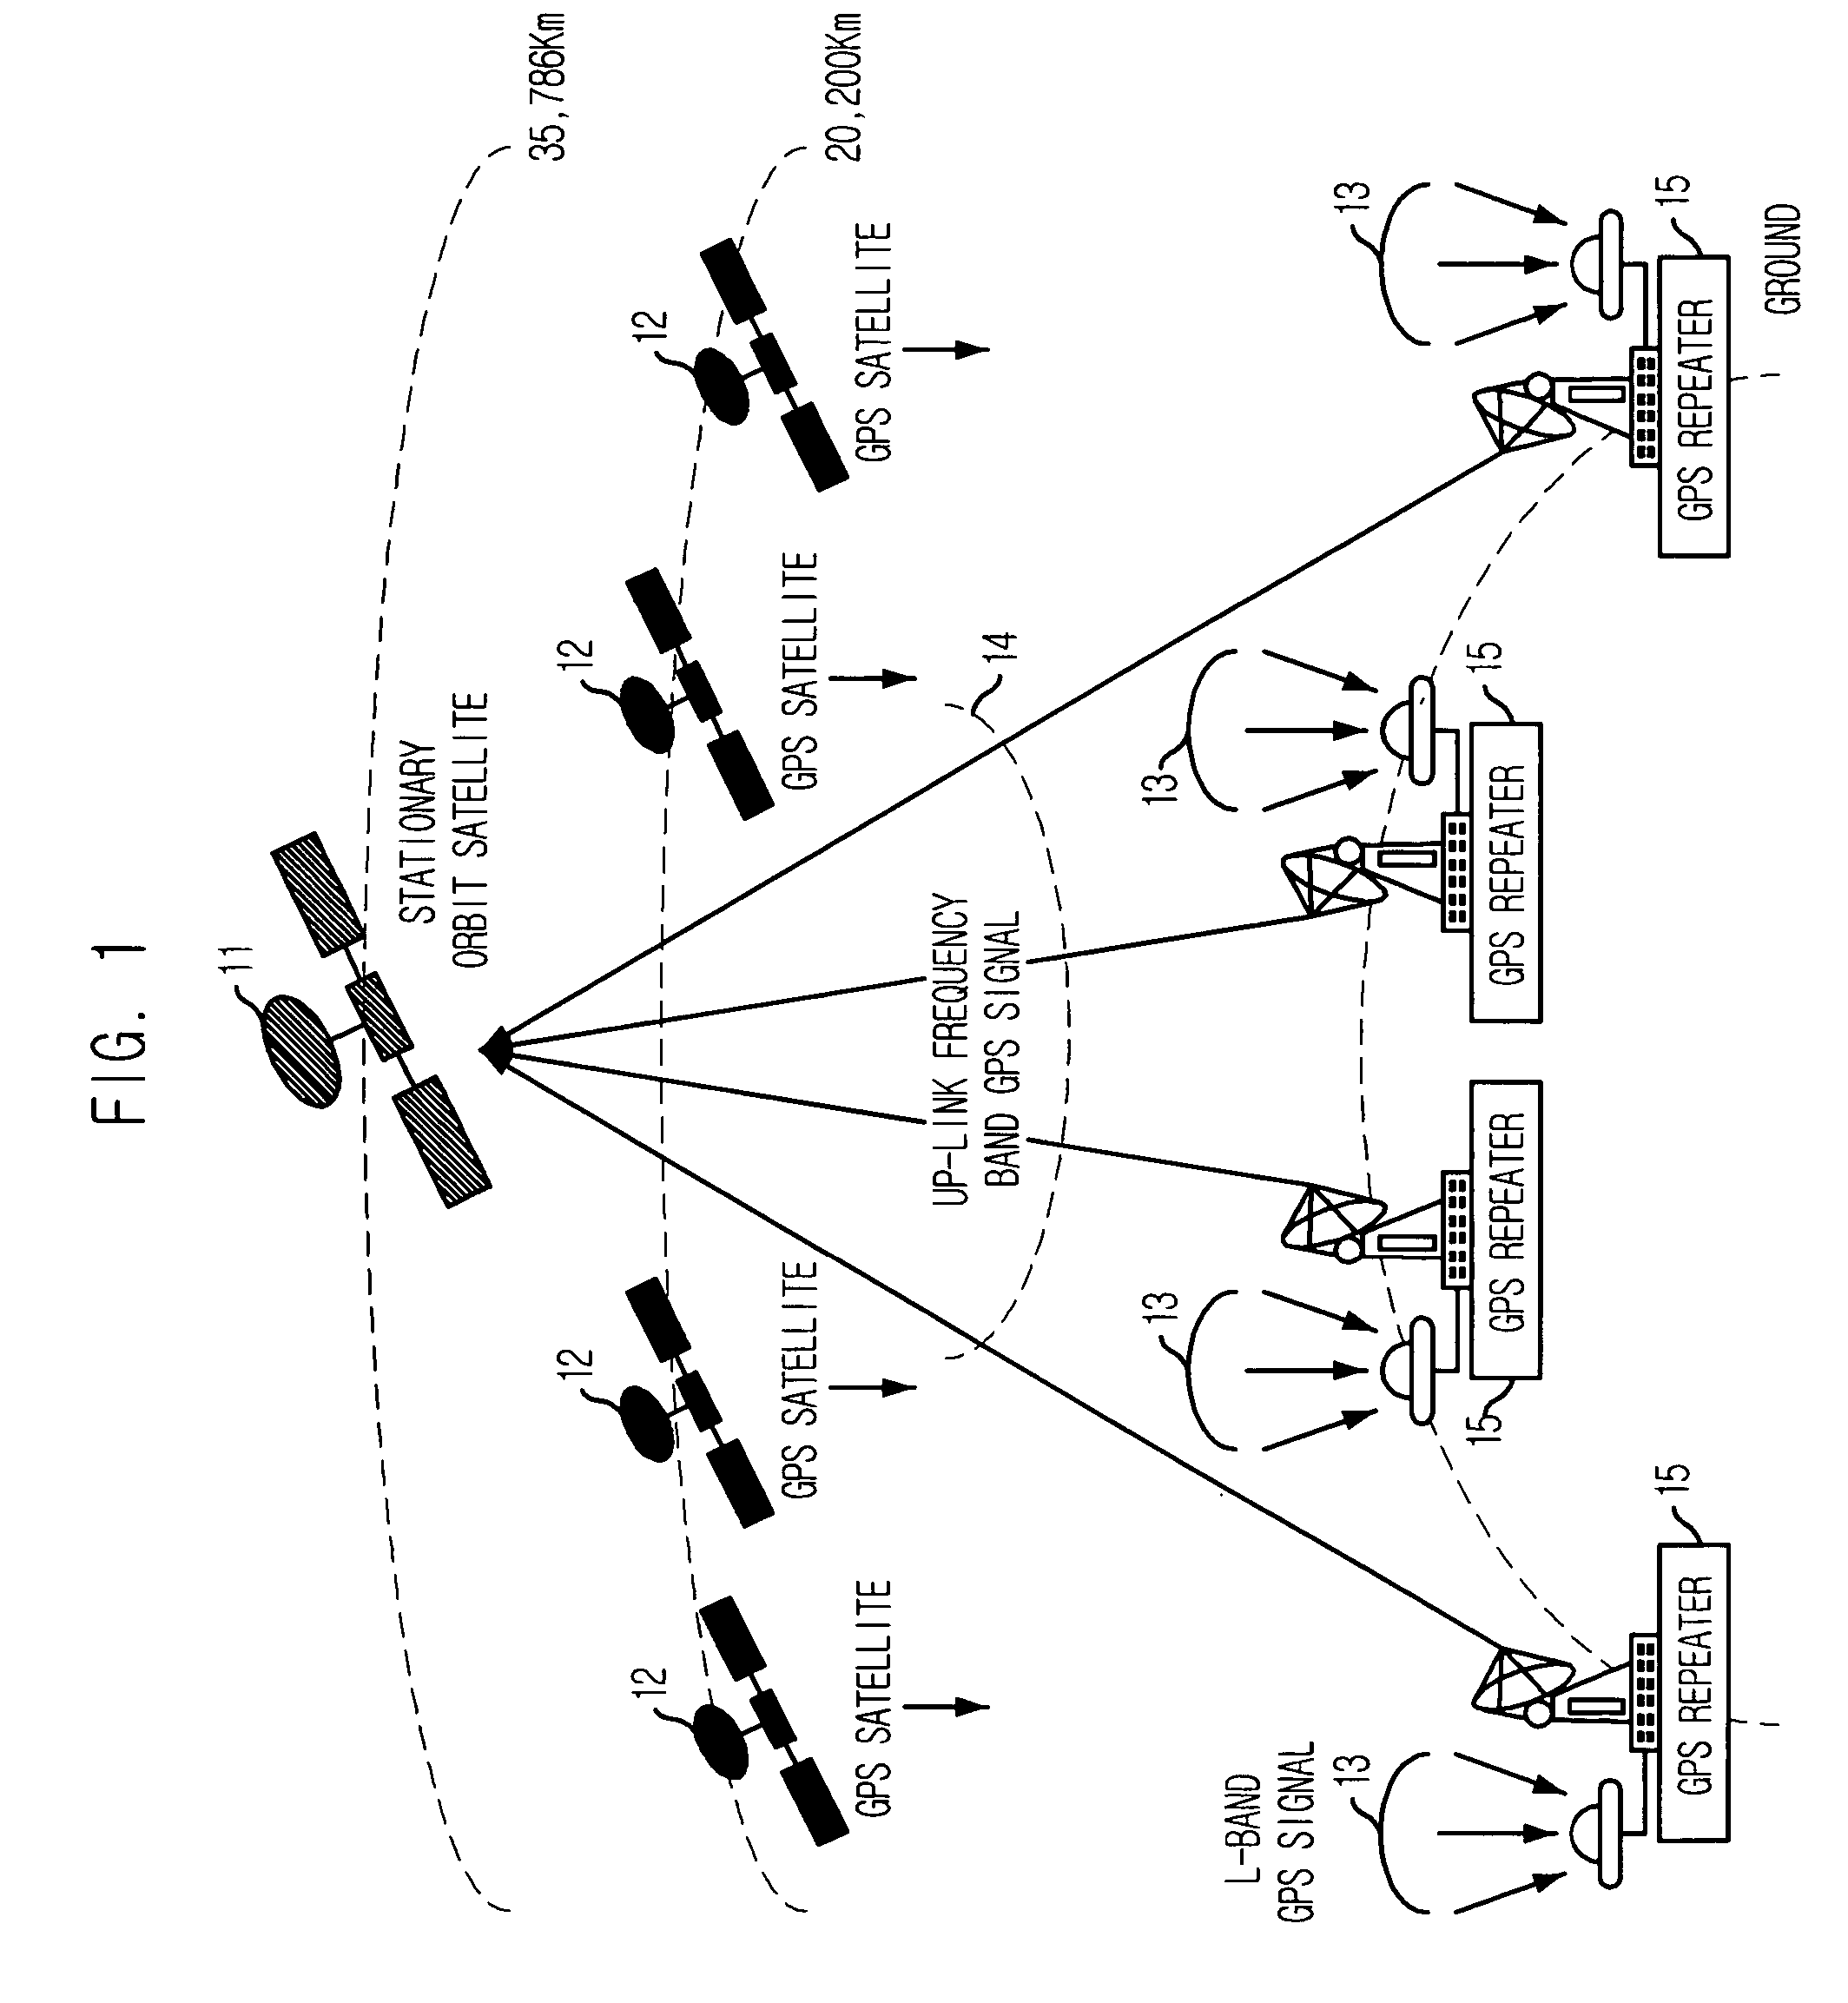 GPS signal repeater and GPS receiver of stationary orbit satellite, and method for positioning stationary orbit satellite using the same